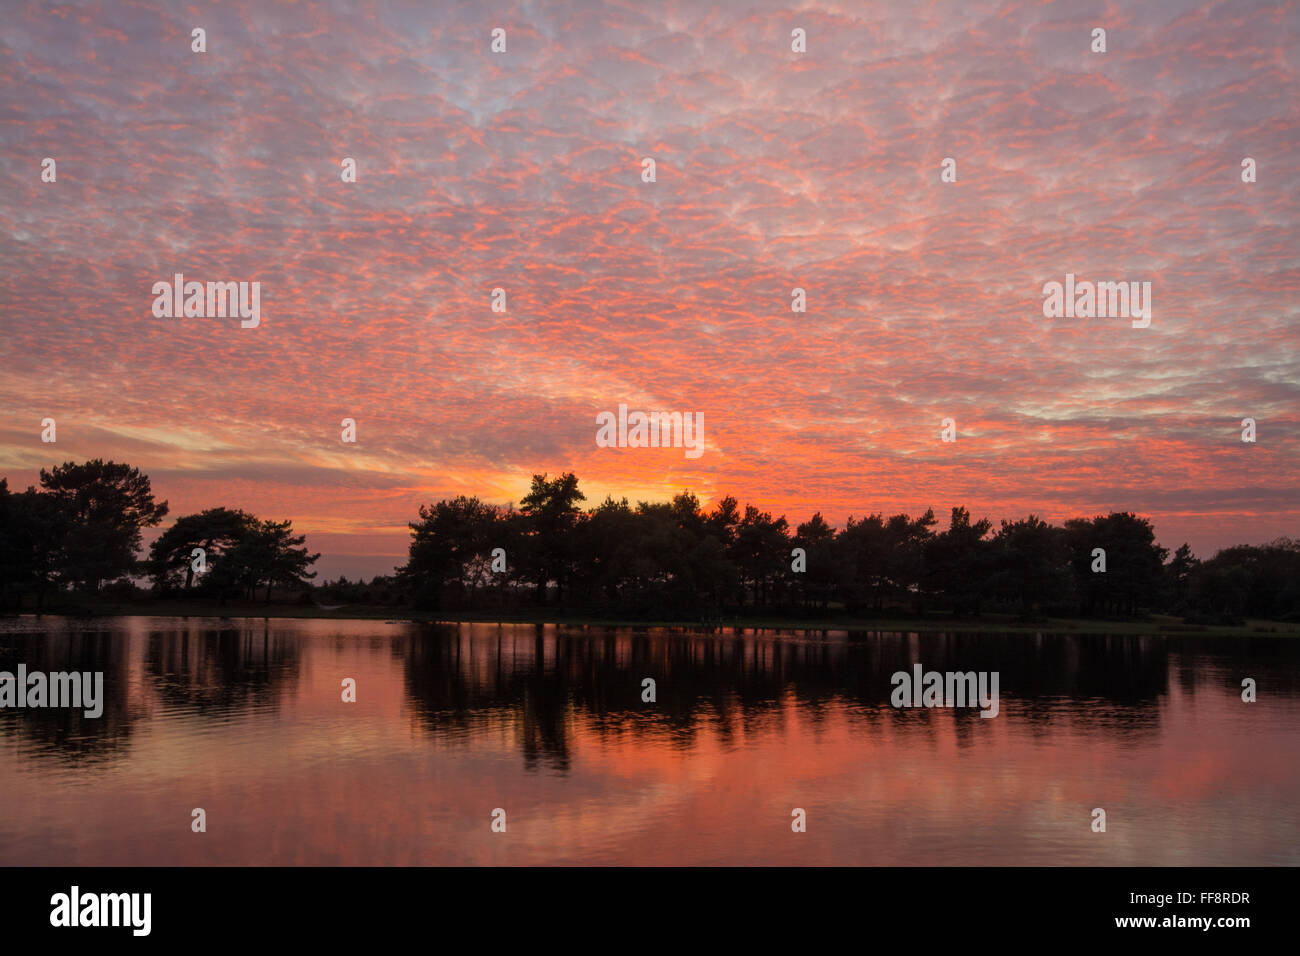 Brightly coloured sunset with mackerel sky and reflections at Hatchet Pond near Beaulieu in the New Forest, Hampshire, England, UK Stock Photo